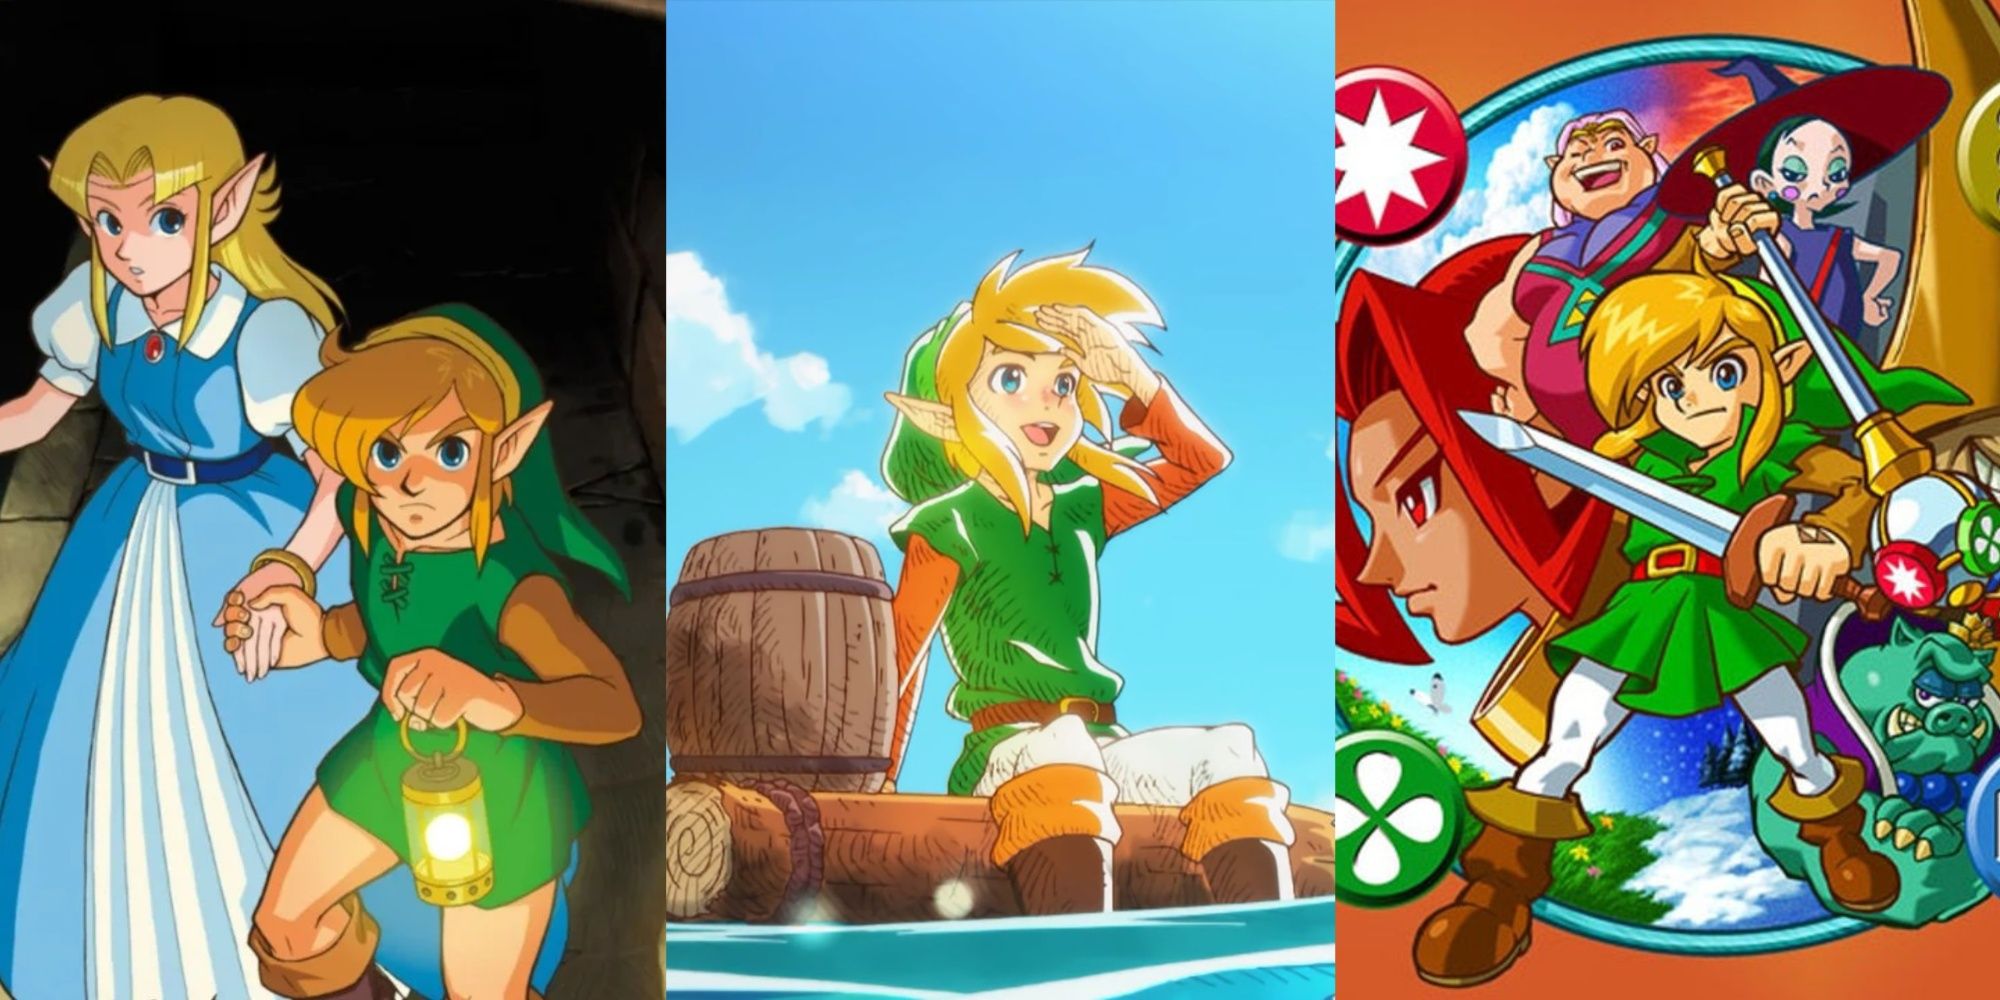 Split images of official art showing Link and Zelda in A Link to the Past, Link on a raft in Link's Awakening, and Link with supporting characters in Oracles of Ages and Seasons